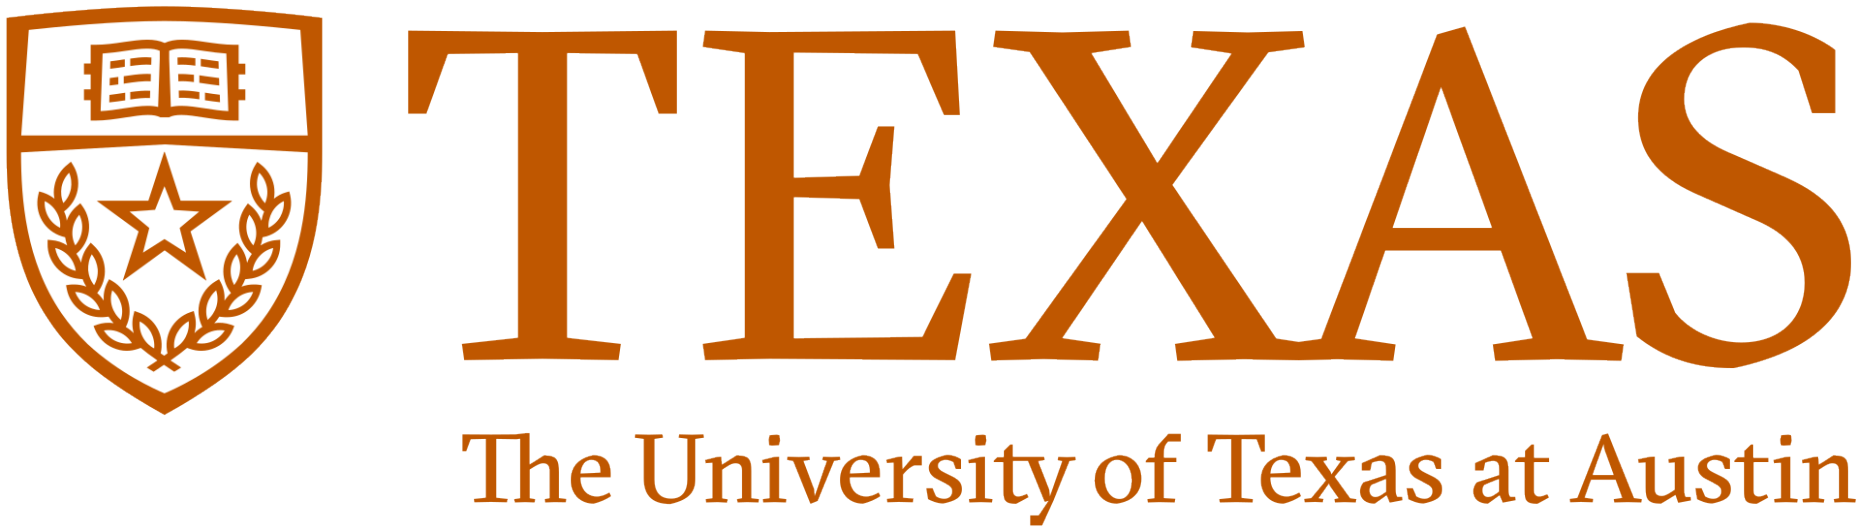 Shield of the University of Texas at Austin